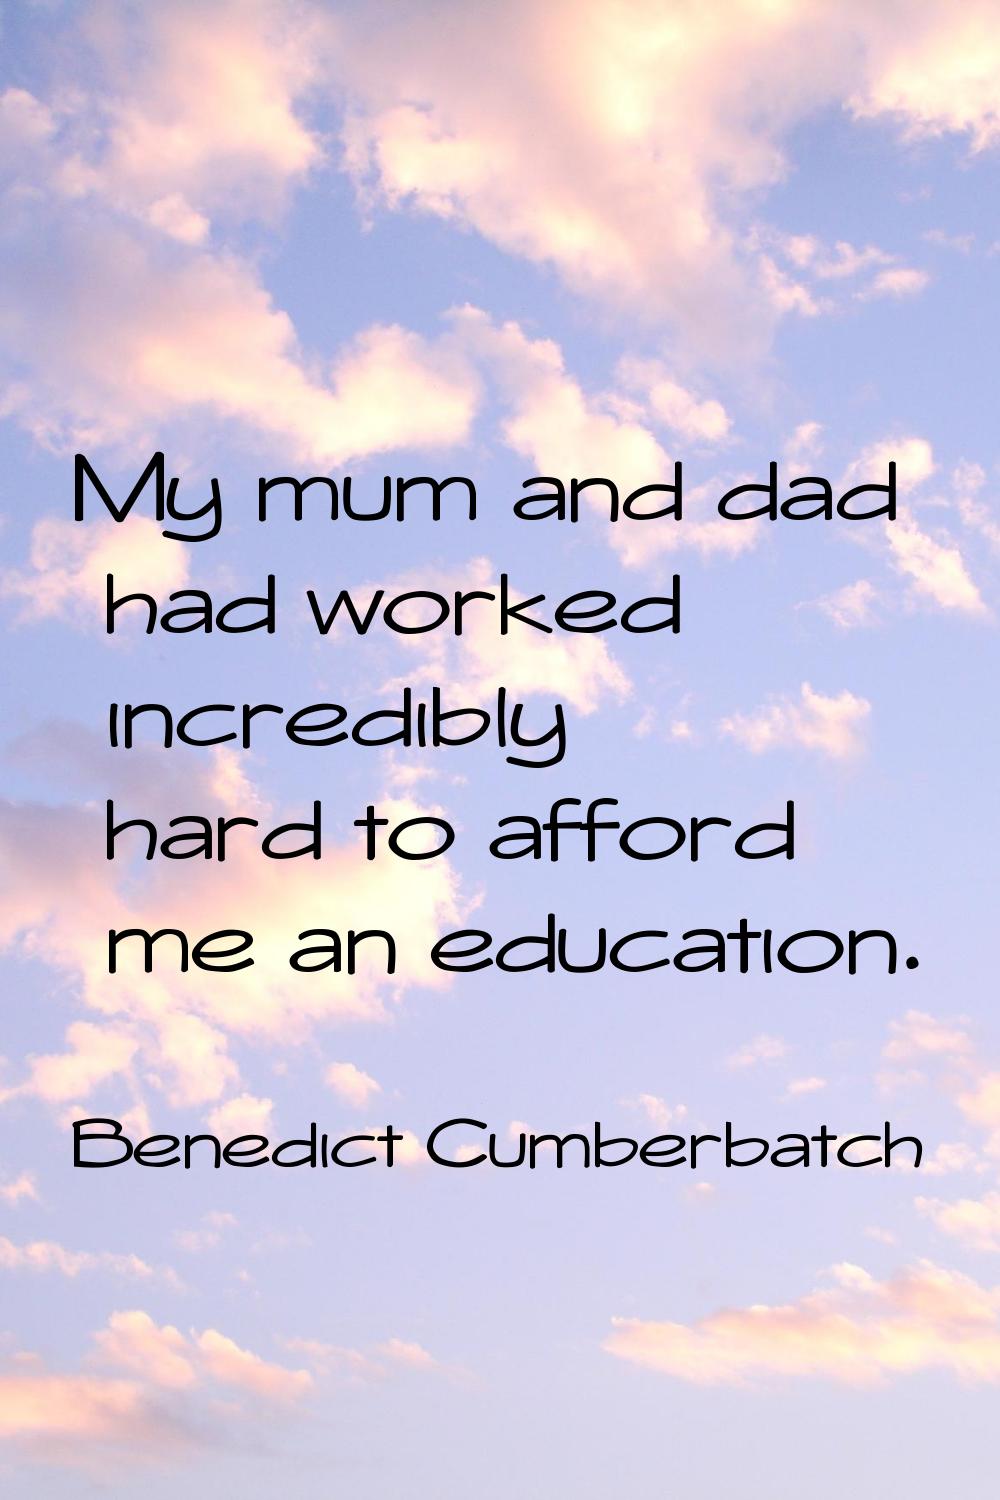 My mum and dad had worked incredibly hard to afford me an education.